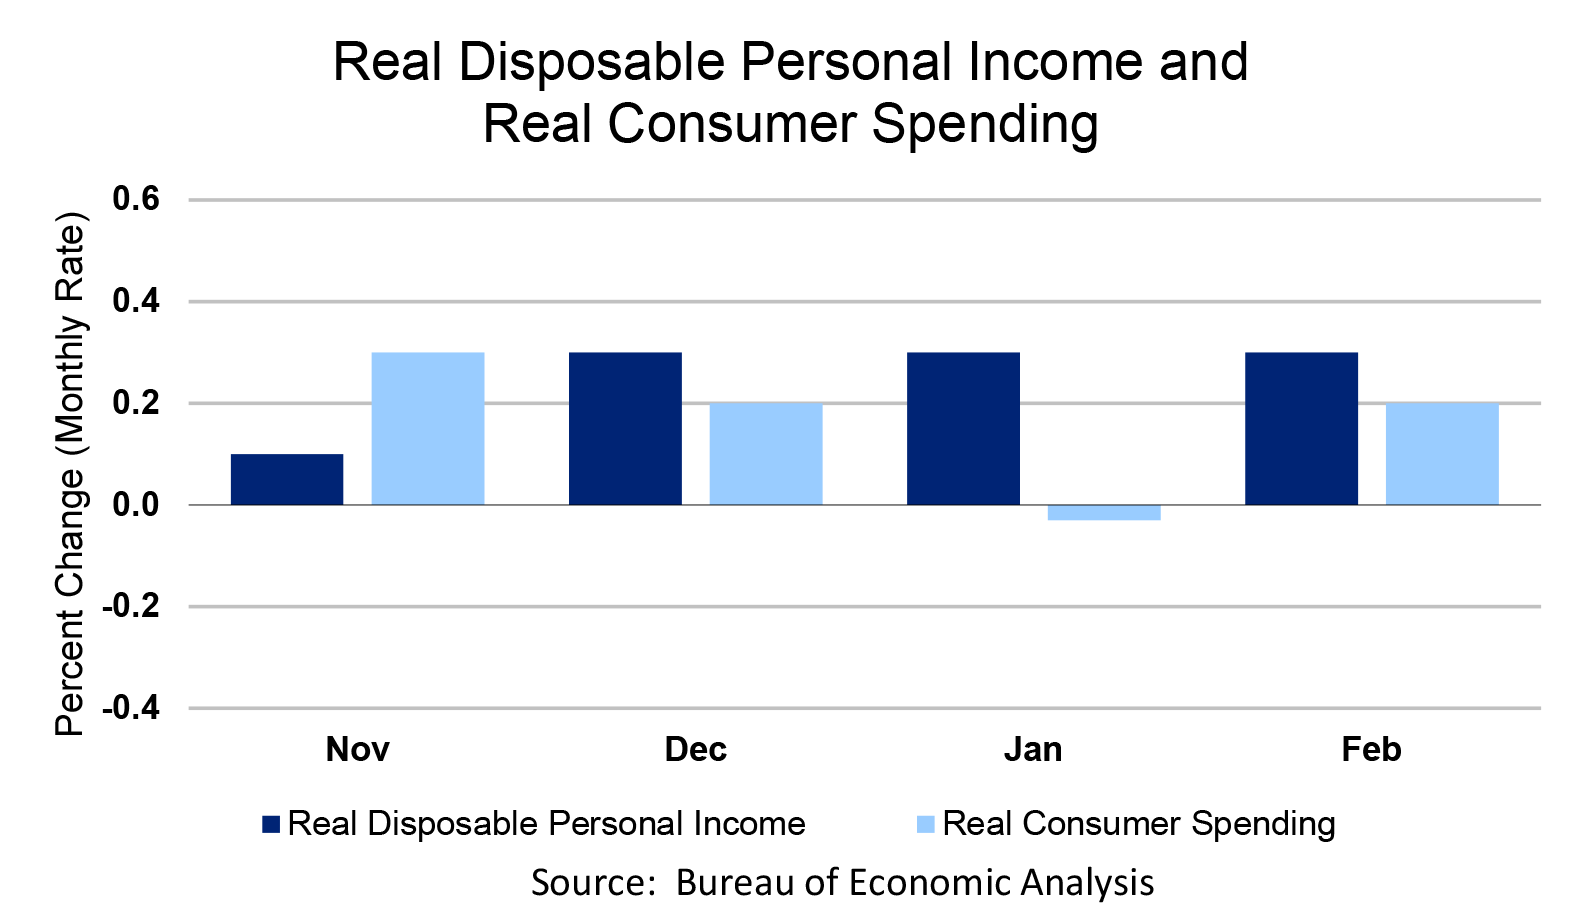 Real Disposable Personal Income and Real Consumer Spending